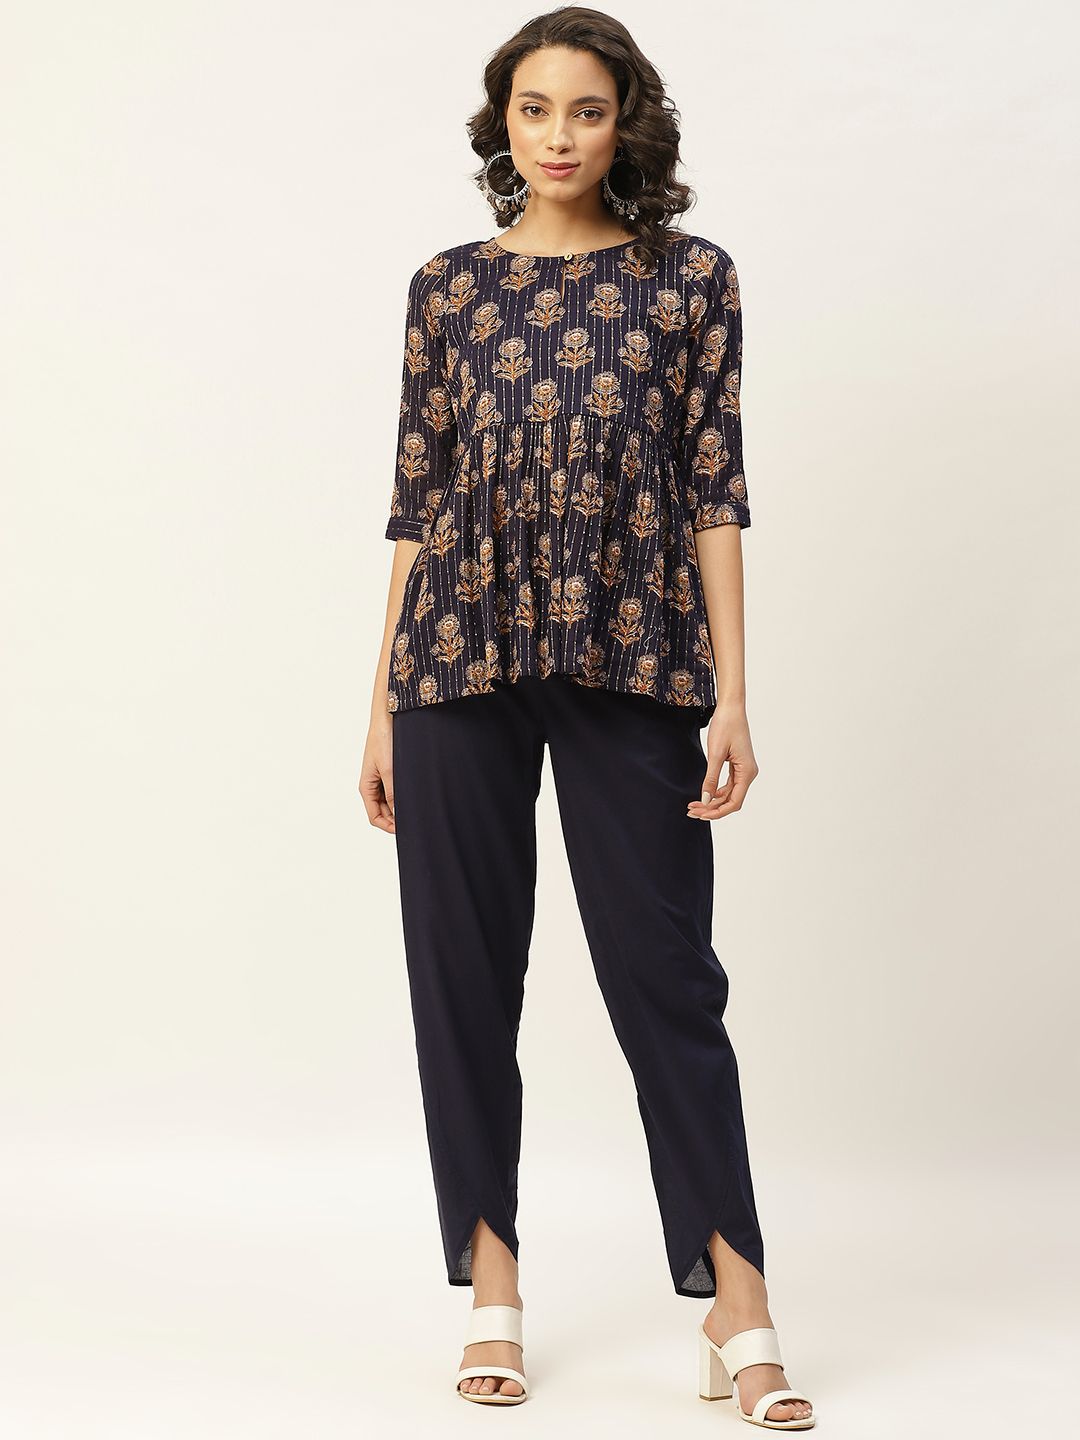 Shae by SASSAFRAS Women Navy Blue & Beige Cotton Printed A-line Top with Trousers Price in India